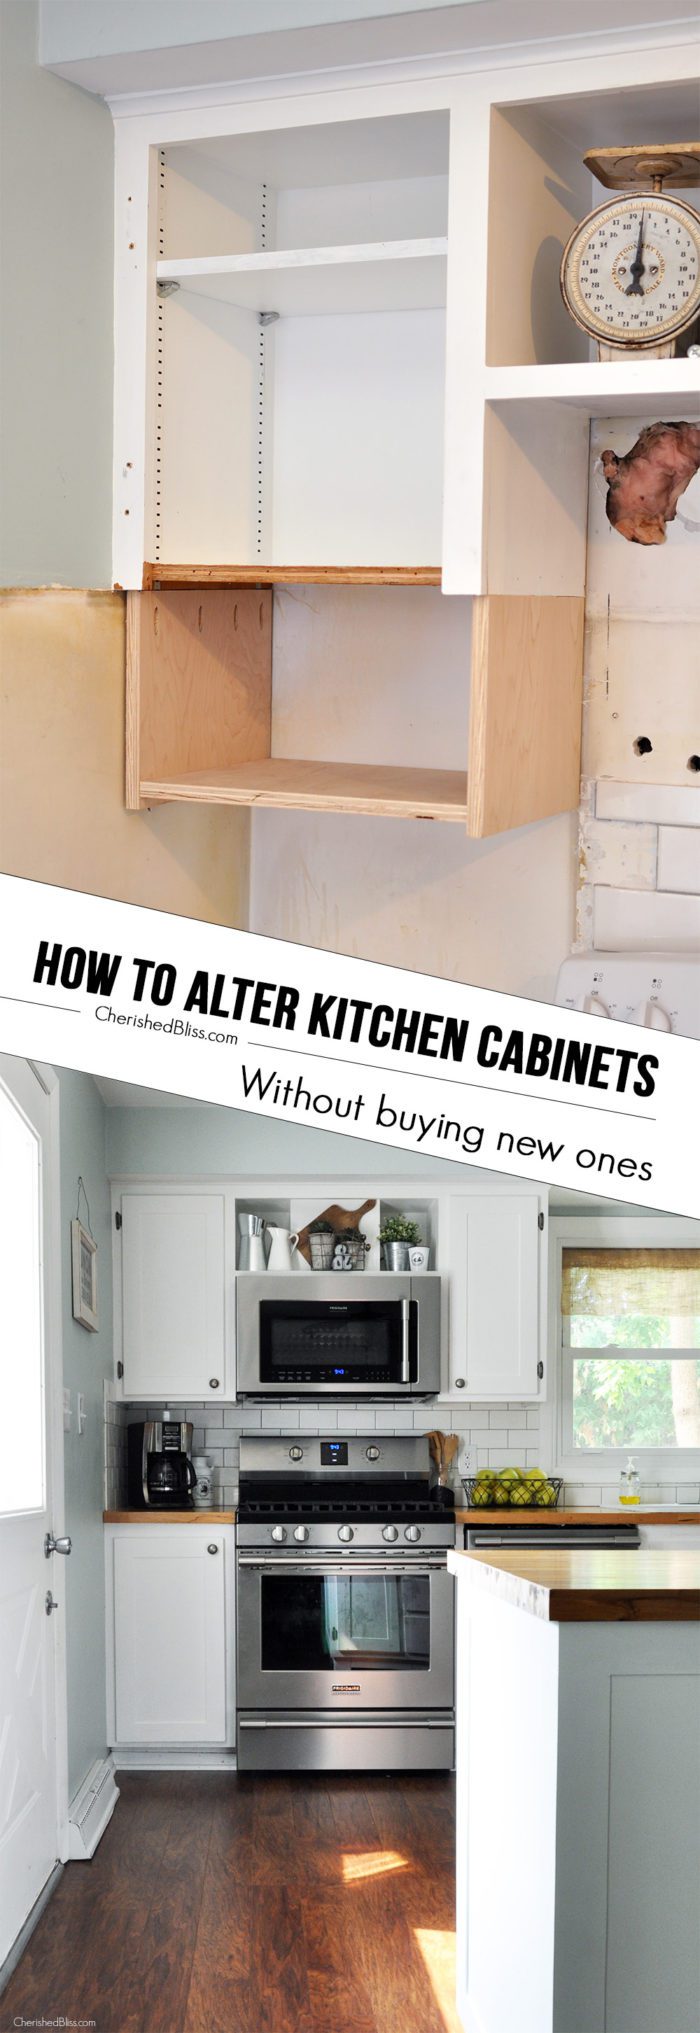 How To Alter Kitchen Cabinets Cherished Bliss